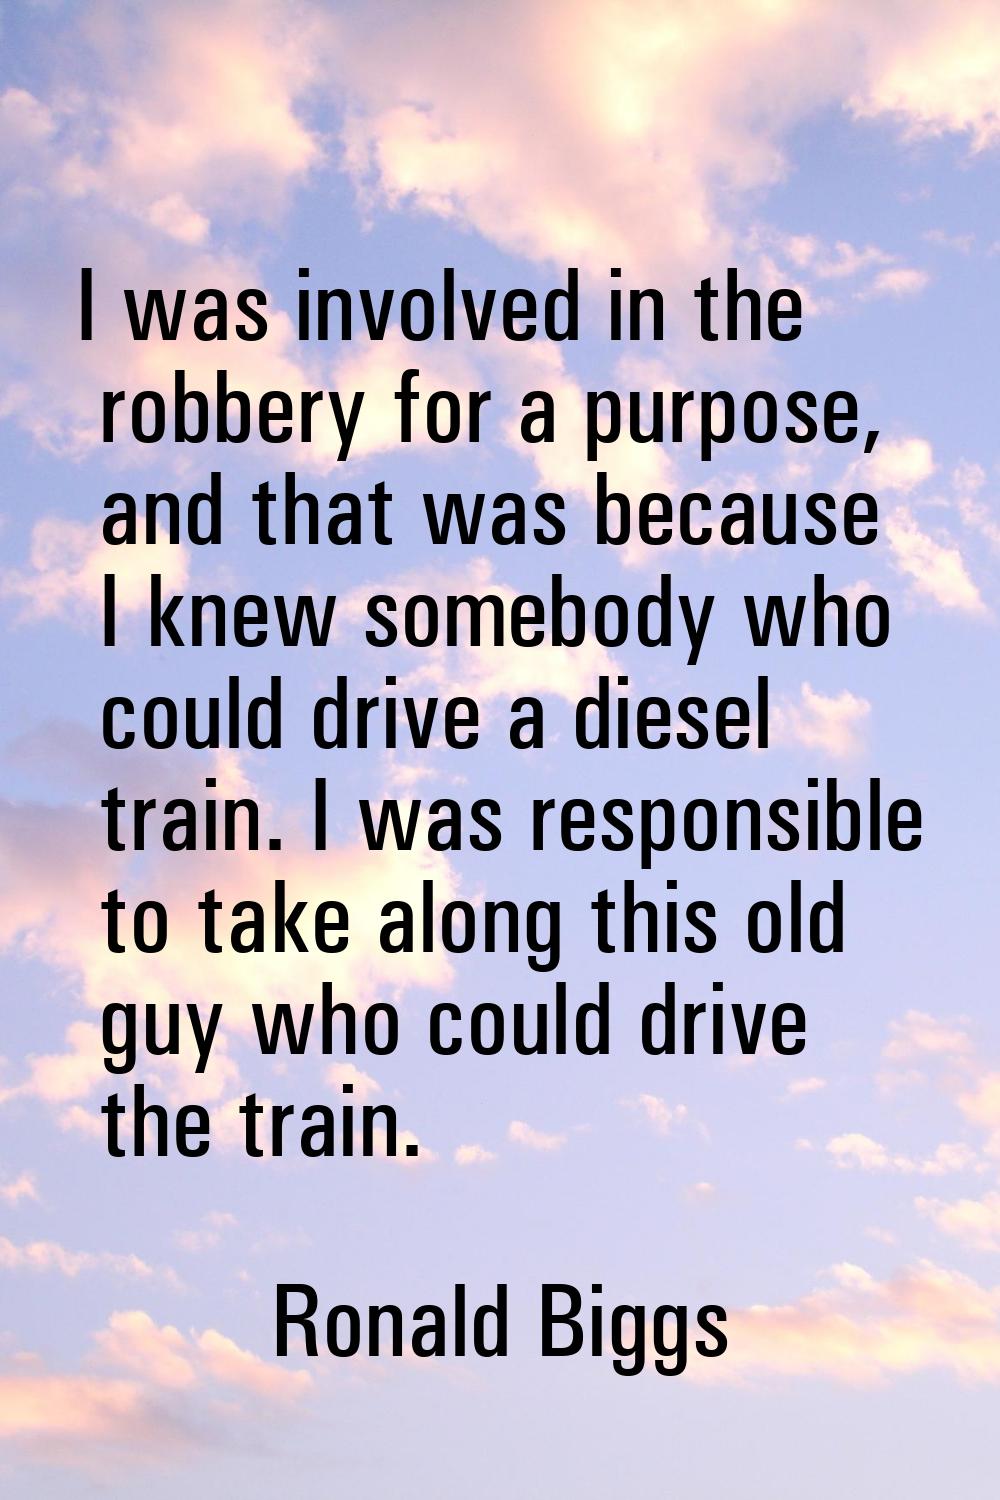 I was involved in the robbery for a purpose, and that was because I knew somebody who could drive a